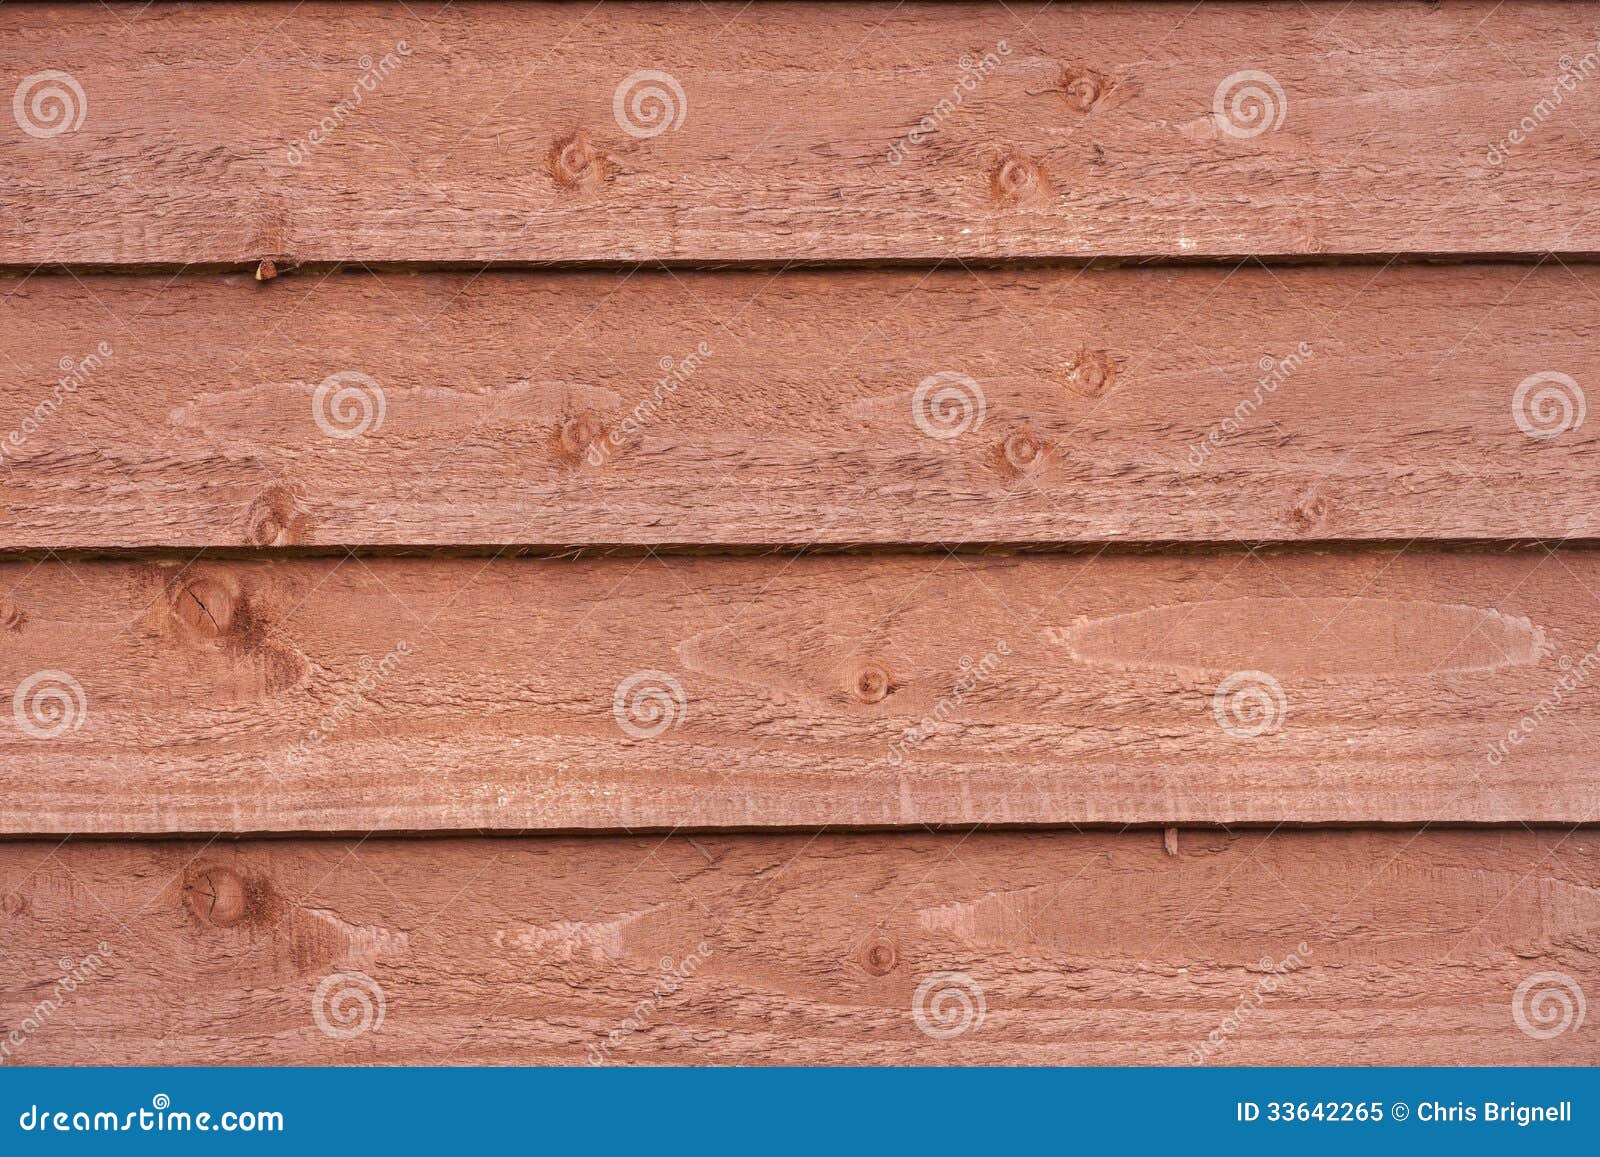 Wooden Shed Panel Abstract Royalty Free Stock Photo - Image: 33642265